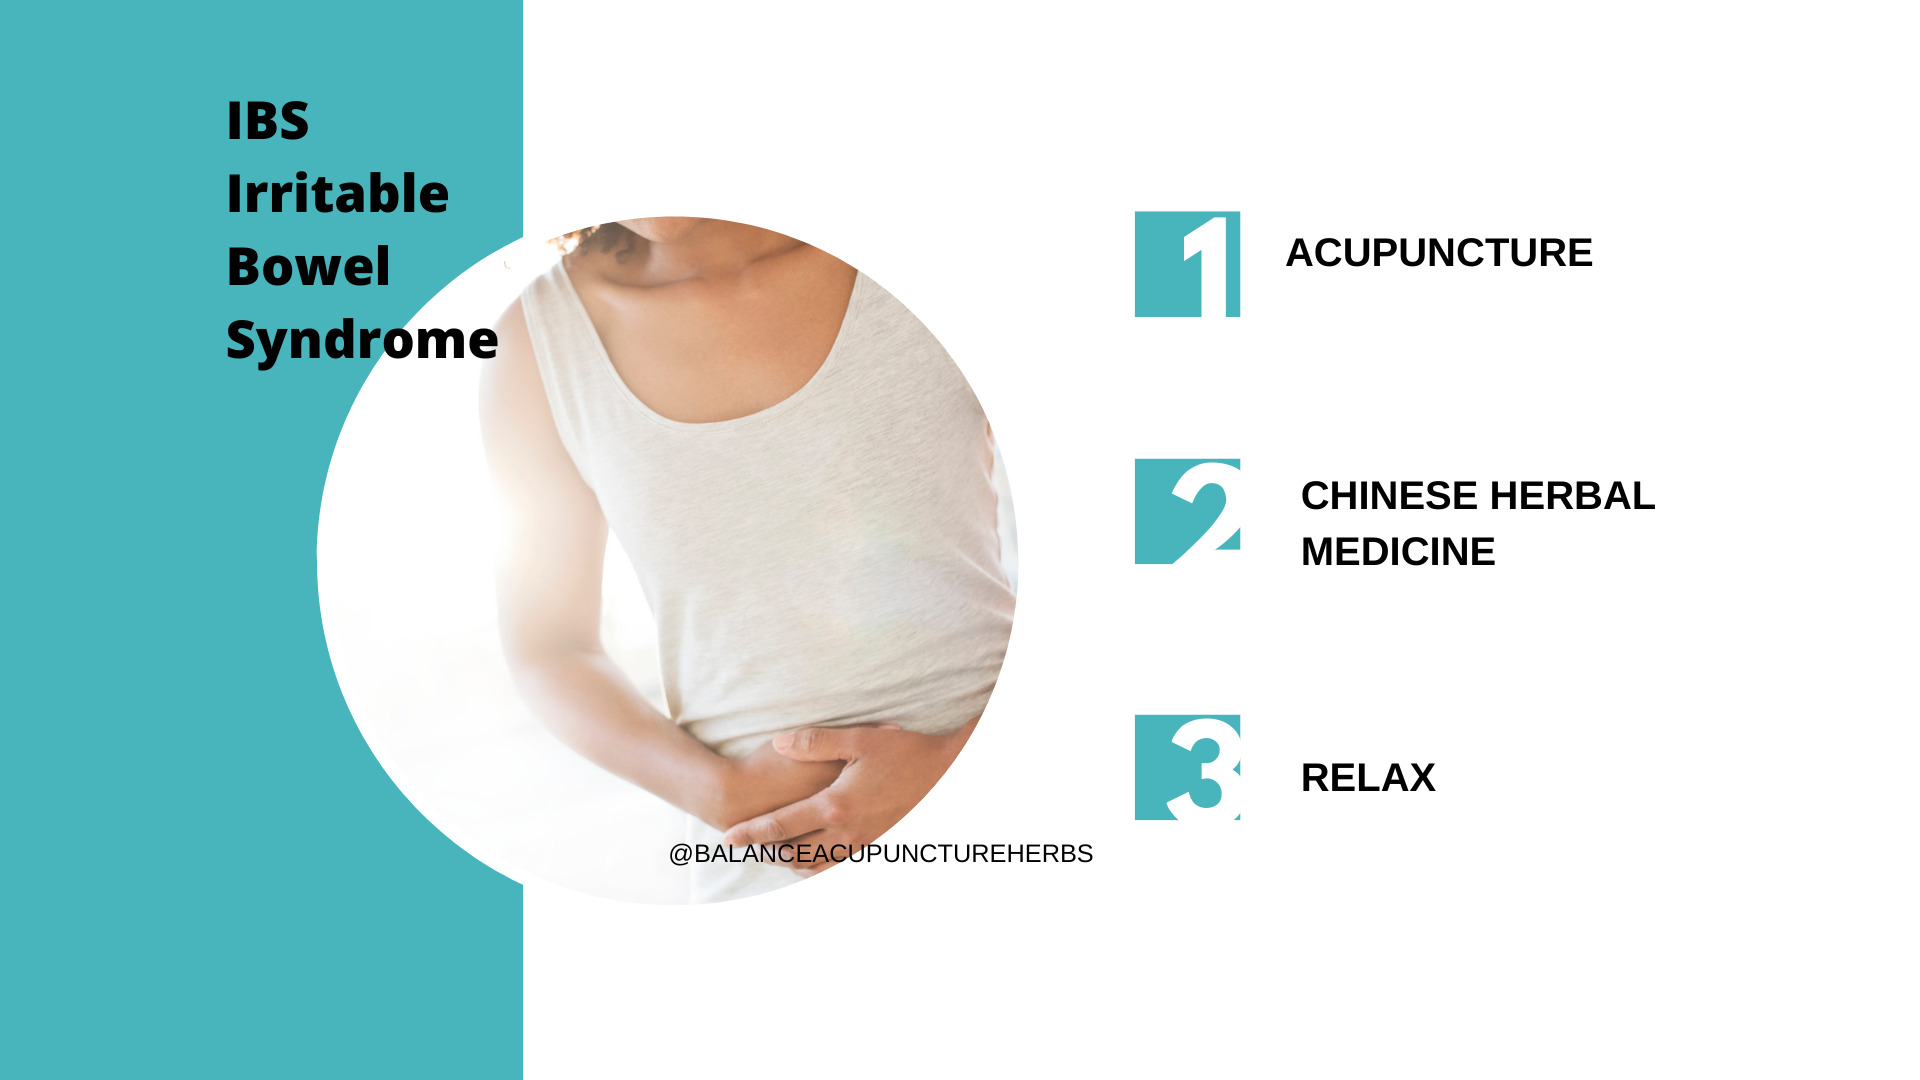 Irritable Bowel Syndrome in Acupuncture